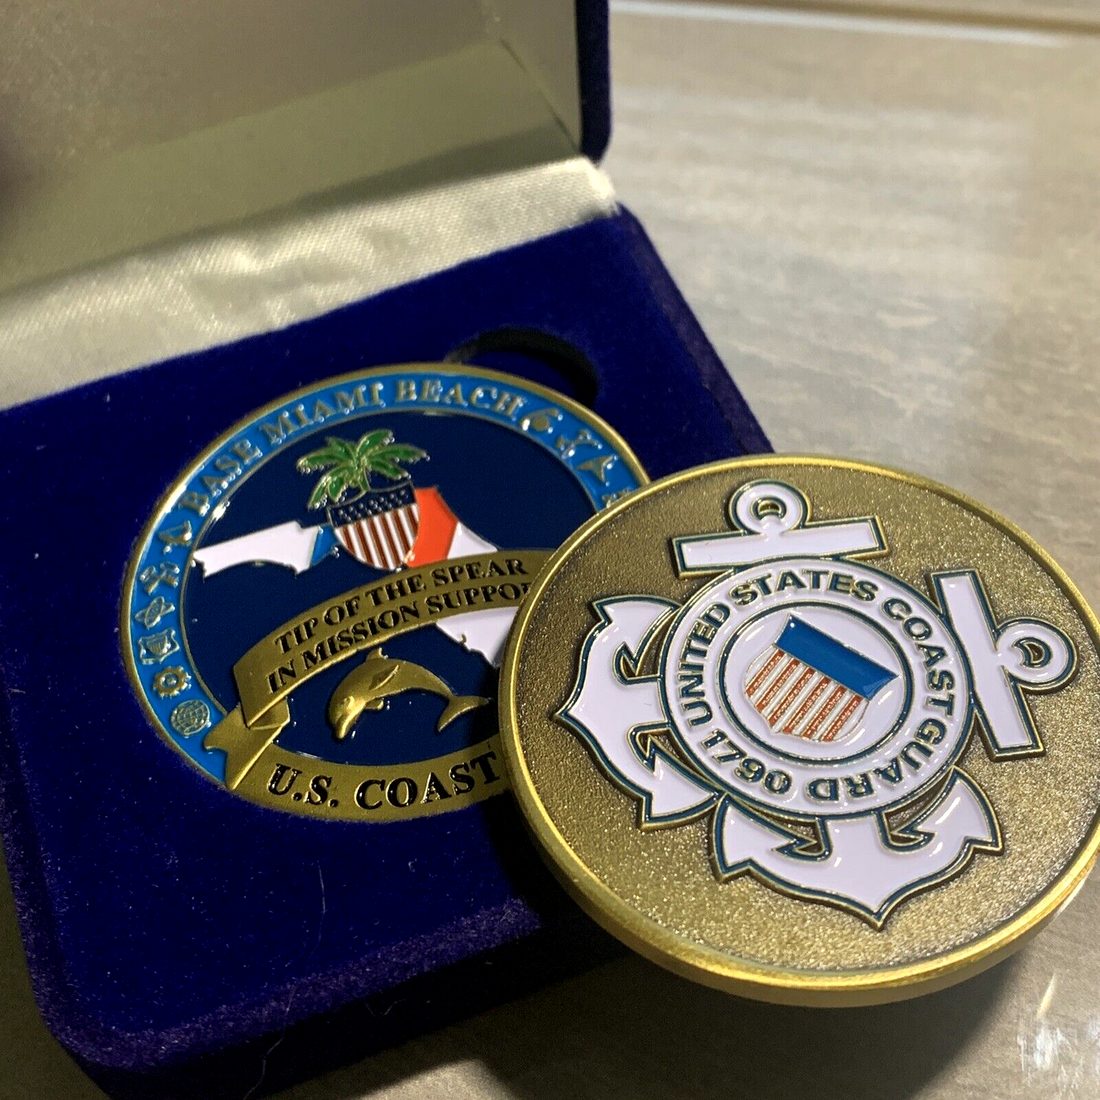 USCG BASE MIAMI BEACH CHALLENGE COIN "TIP OF THE SPEAR" Large 1.75" w/Box NEW on eBay